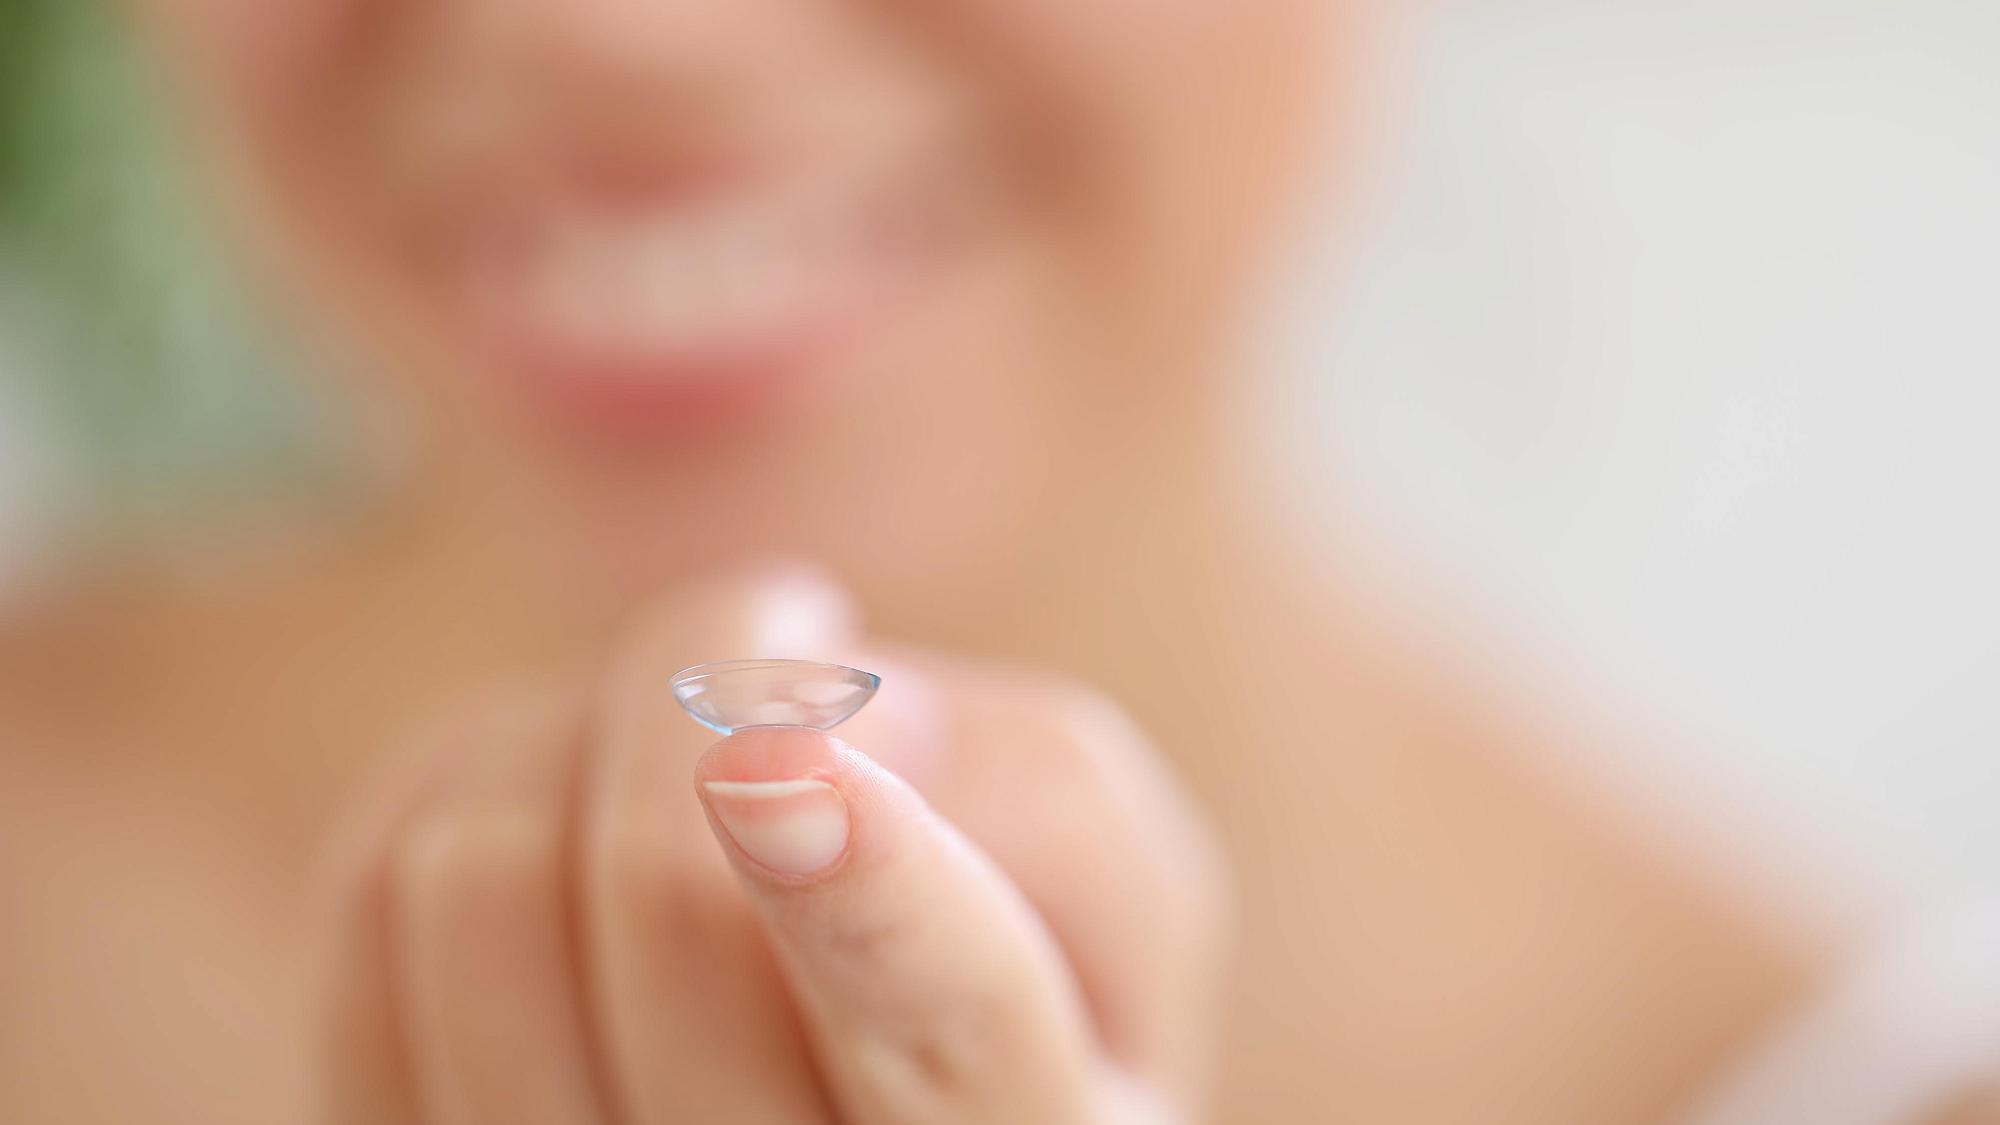 Woman holding a contact lens.